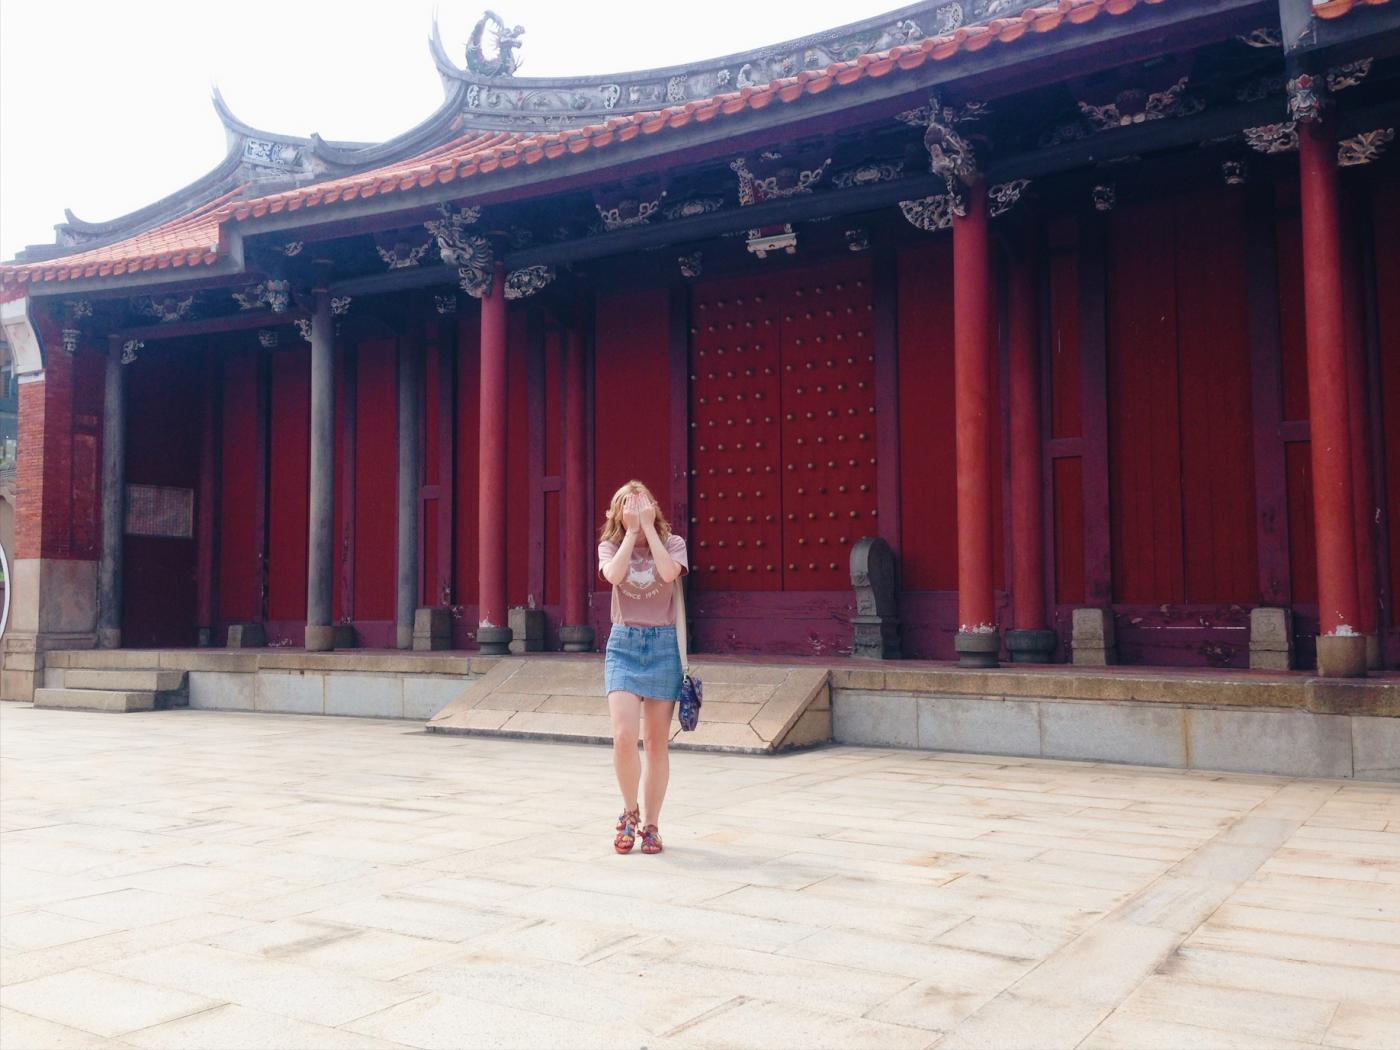 Nicole at the Confucius Temple in Changhua, Taiwan